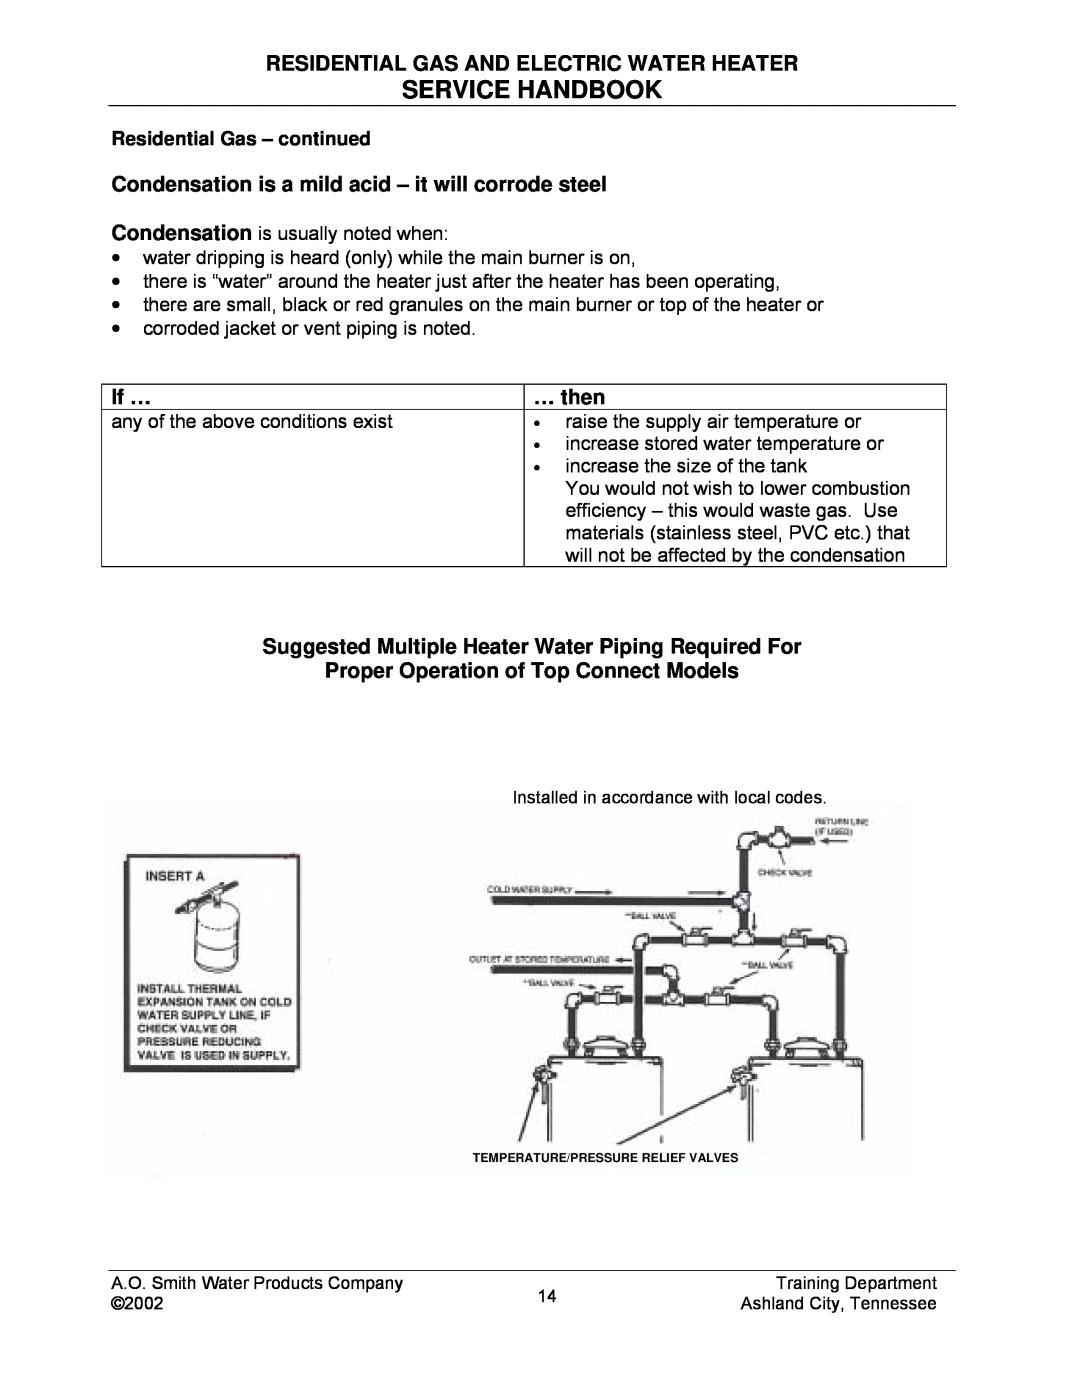 A.O. Smith TC-049-R2 manual Service Handbook, Residential Gas And Electric Water Heater, If …, … then 